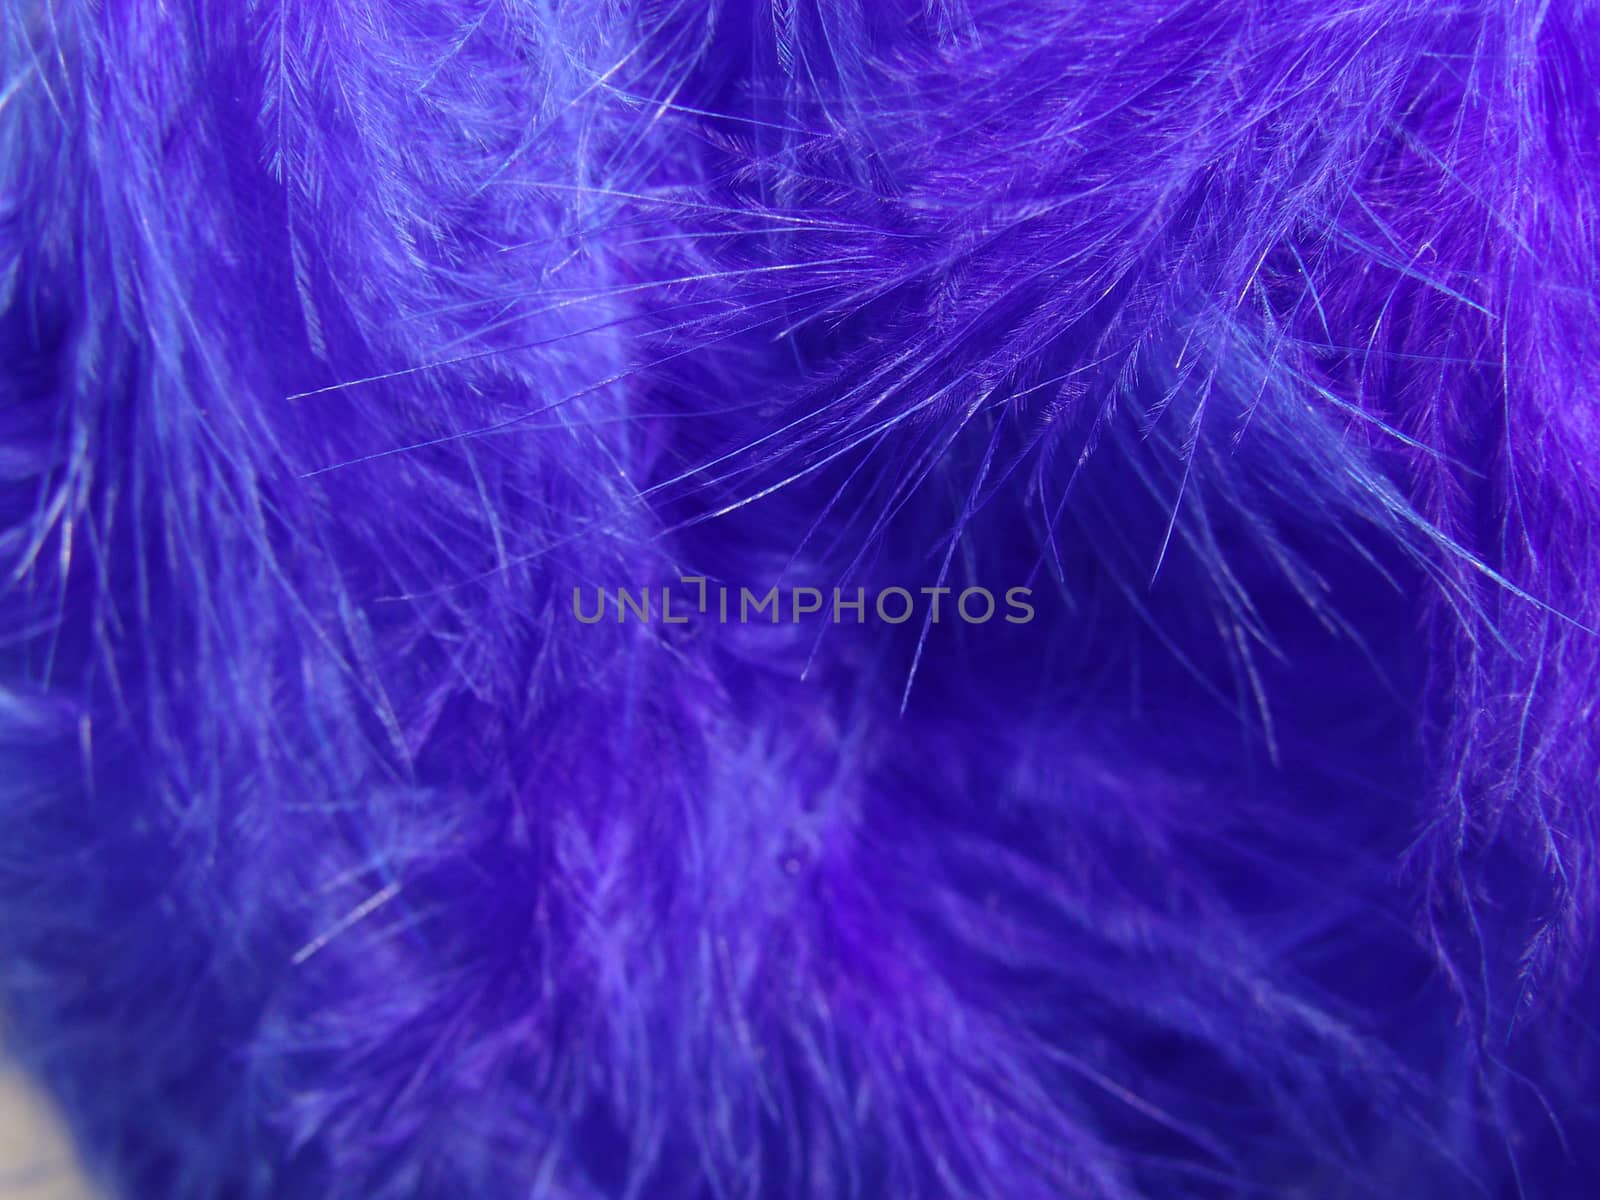 Background for design. Set of fluffy feathers.